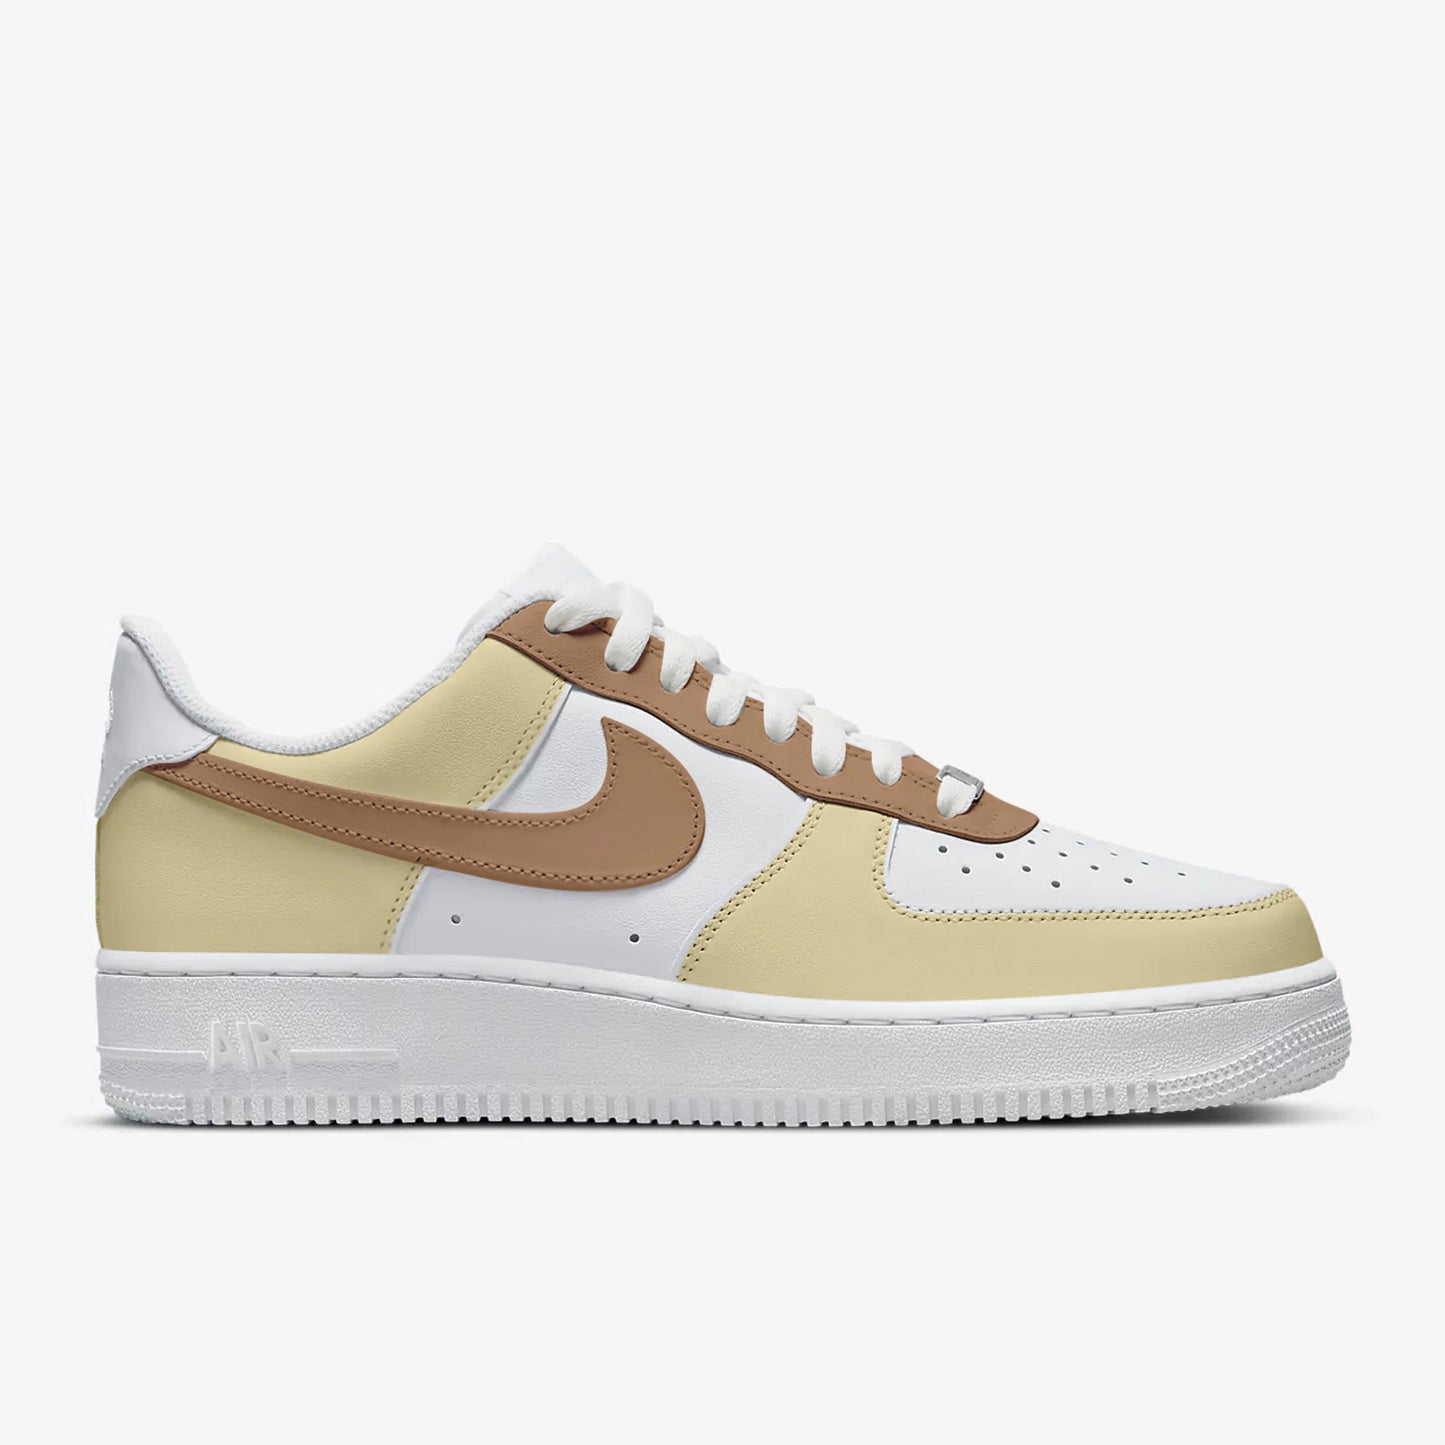 Customised Air Force 1 Cream and tan